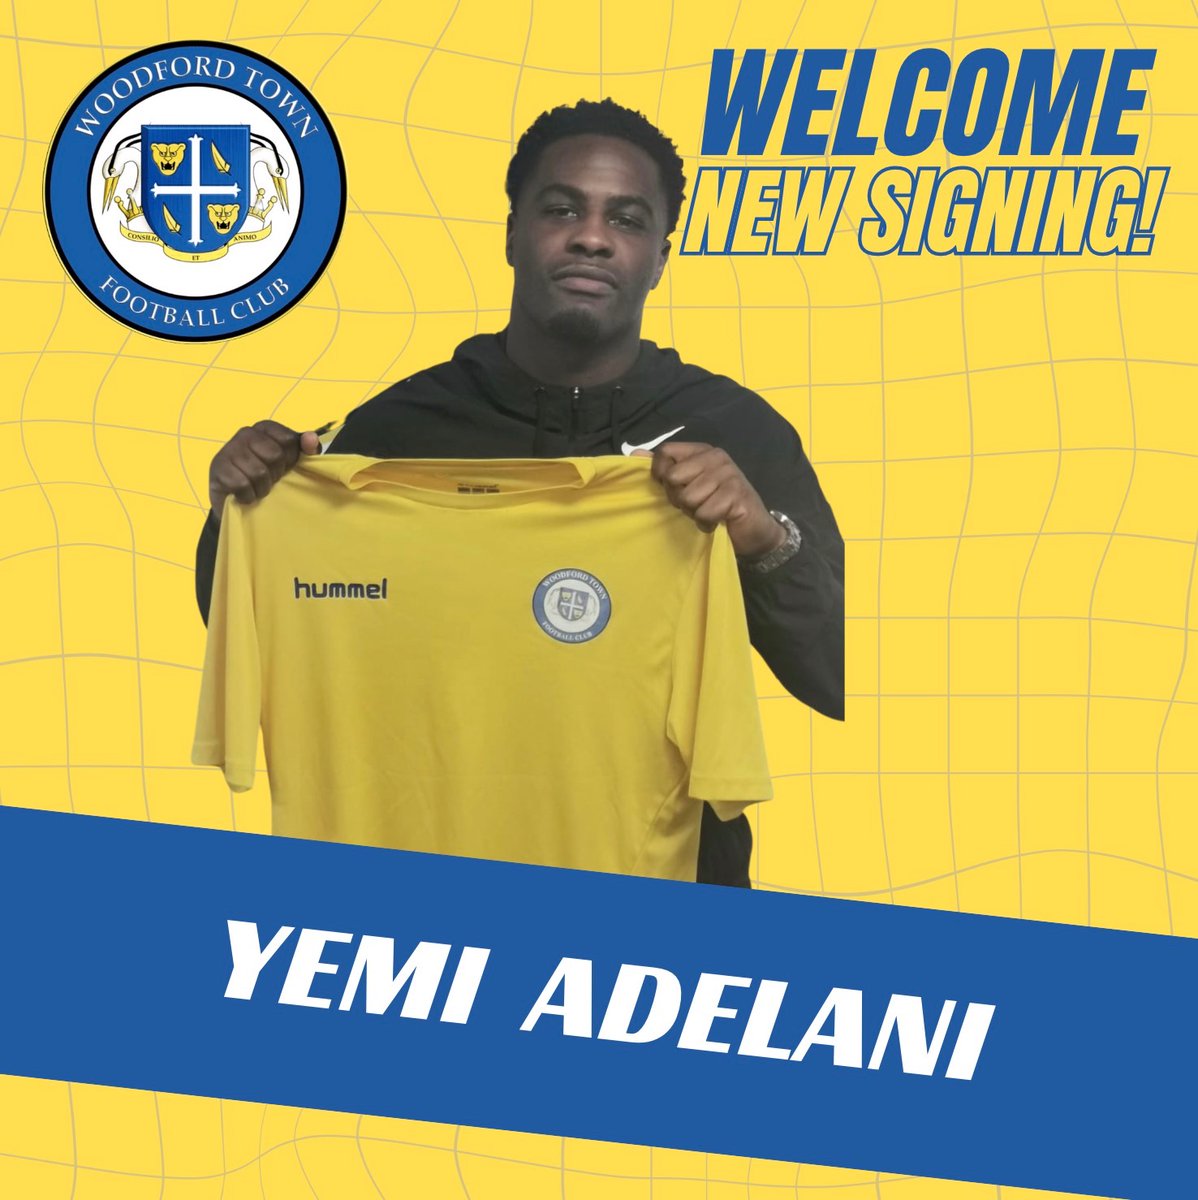 Delighted to announce our 2nd signing of today.
Striker, Yemi Adelani (@Adelani9_) 

Yemi previously won the Essex Senior League with both Hullbridge FC & Walthamstow.

WelcomeYemi 1% 🟡🔵⚪